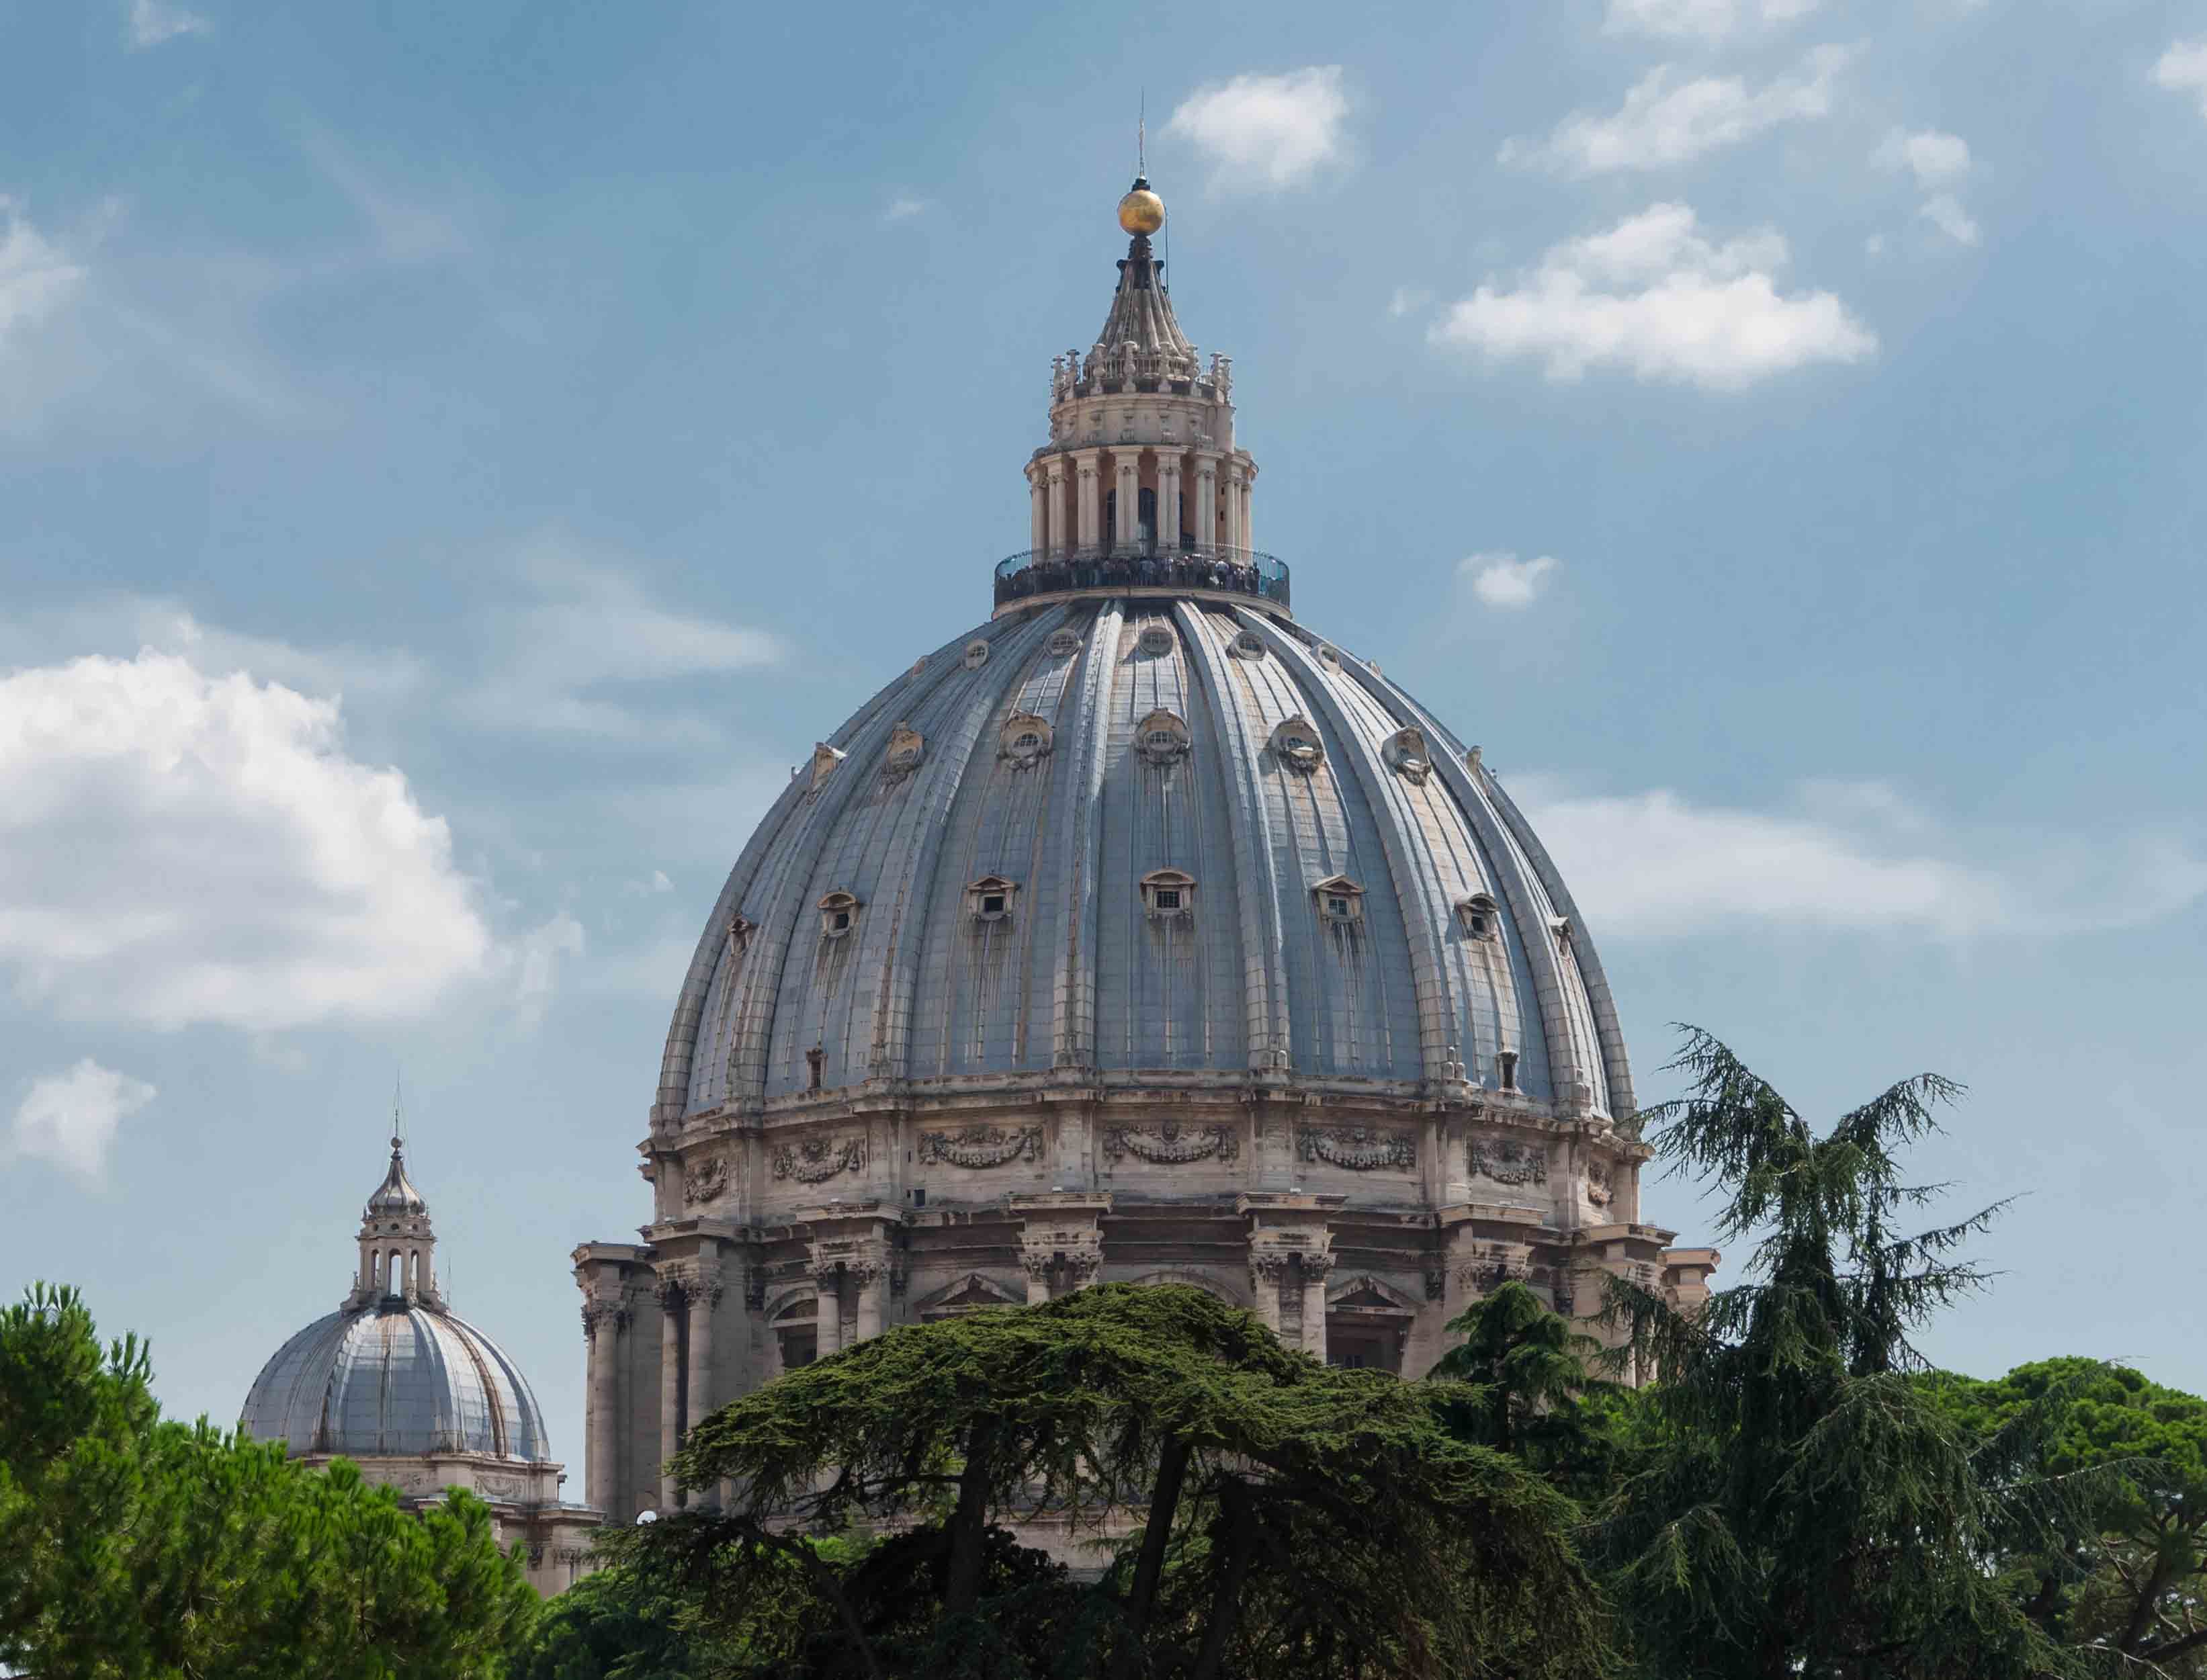 The St. Peter dome - Heart of the Jubilee of Mercy